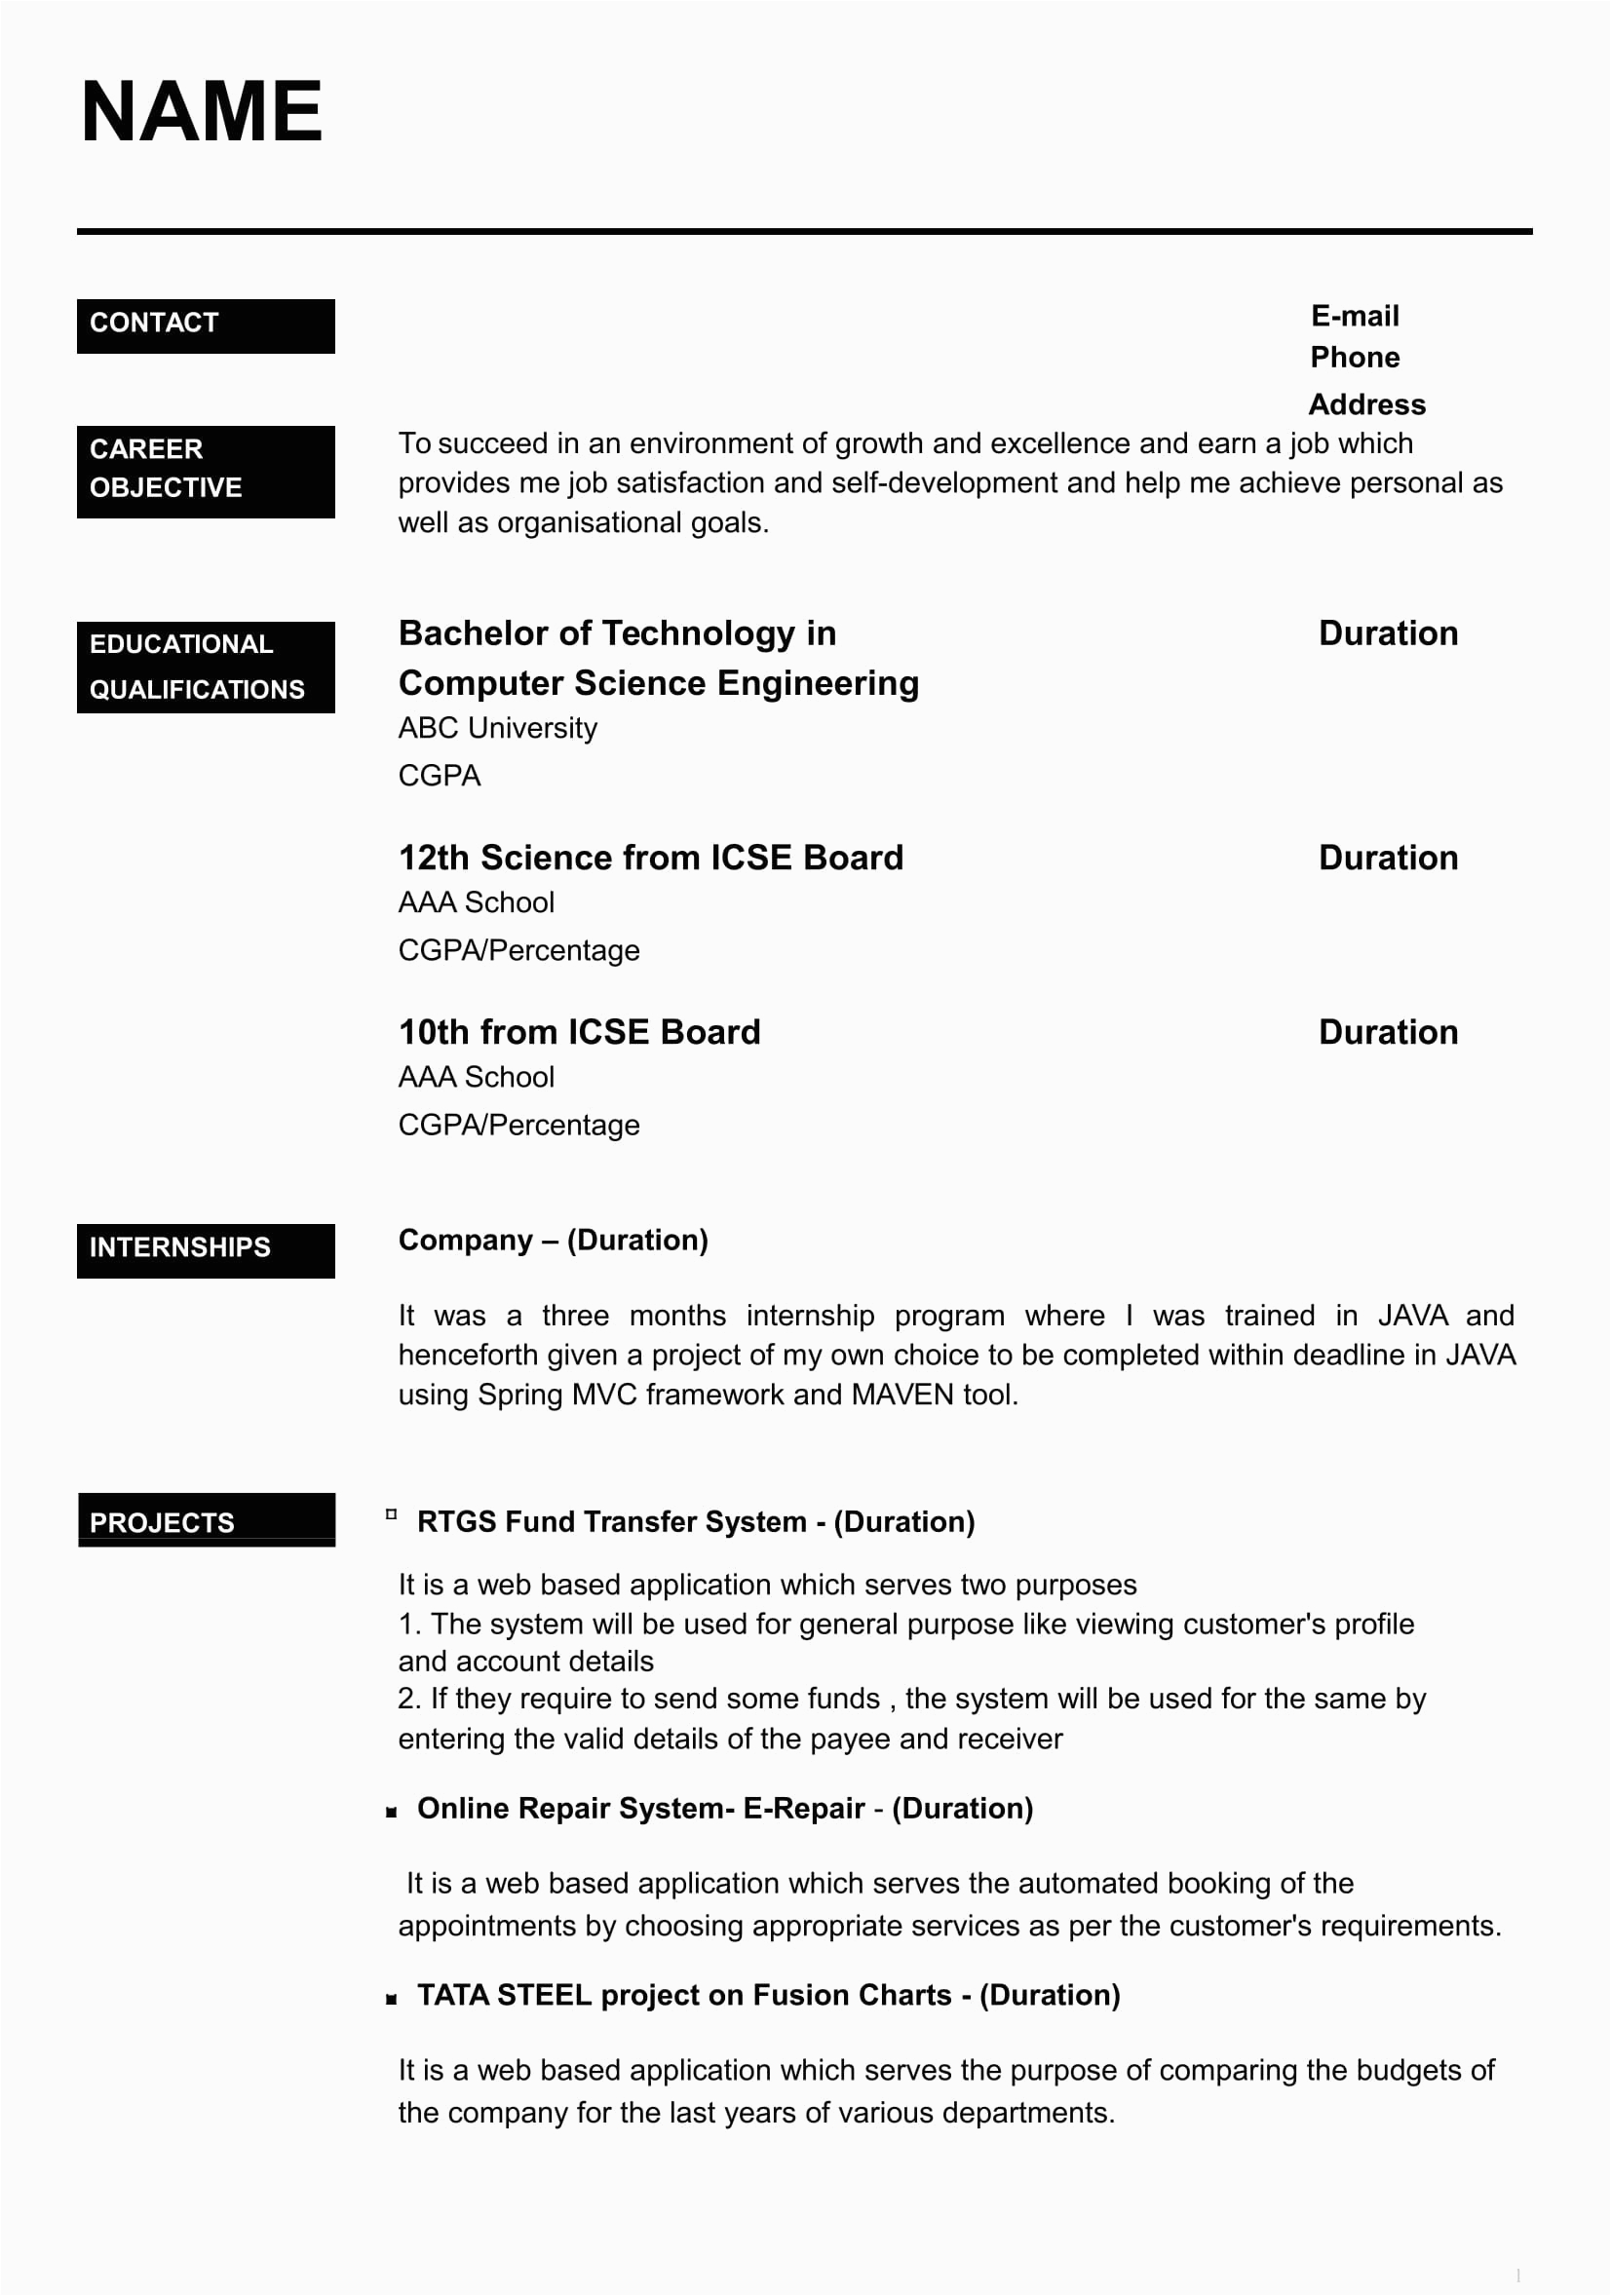 Sample Resume format for Freshers Engineers Resume Samples for It Engineers Freshers top Engineering